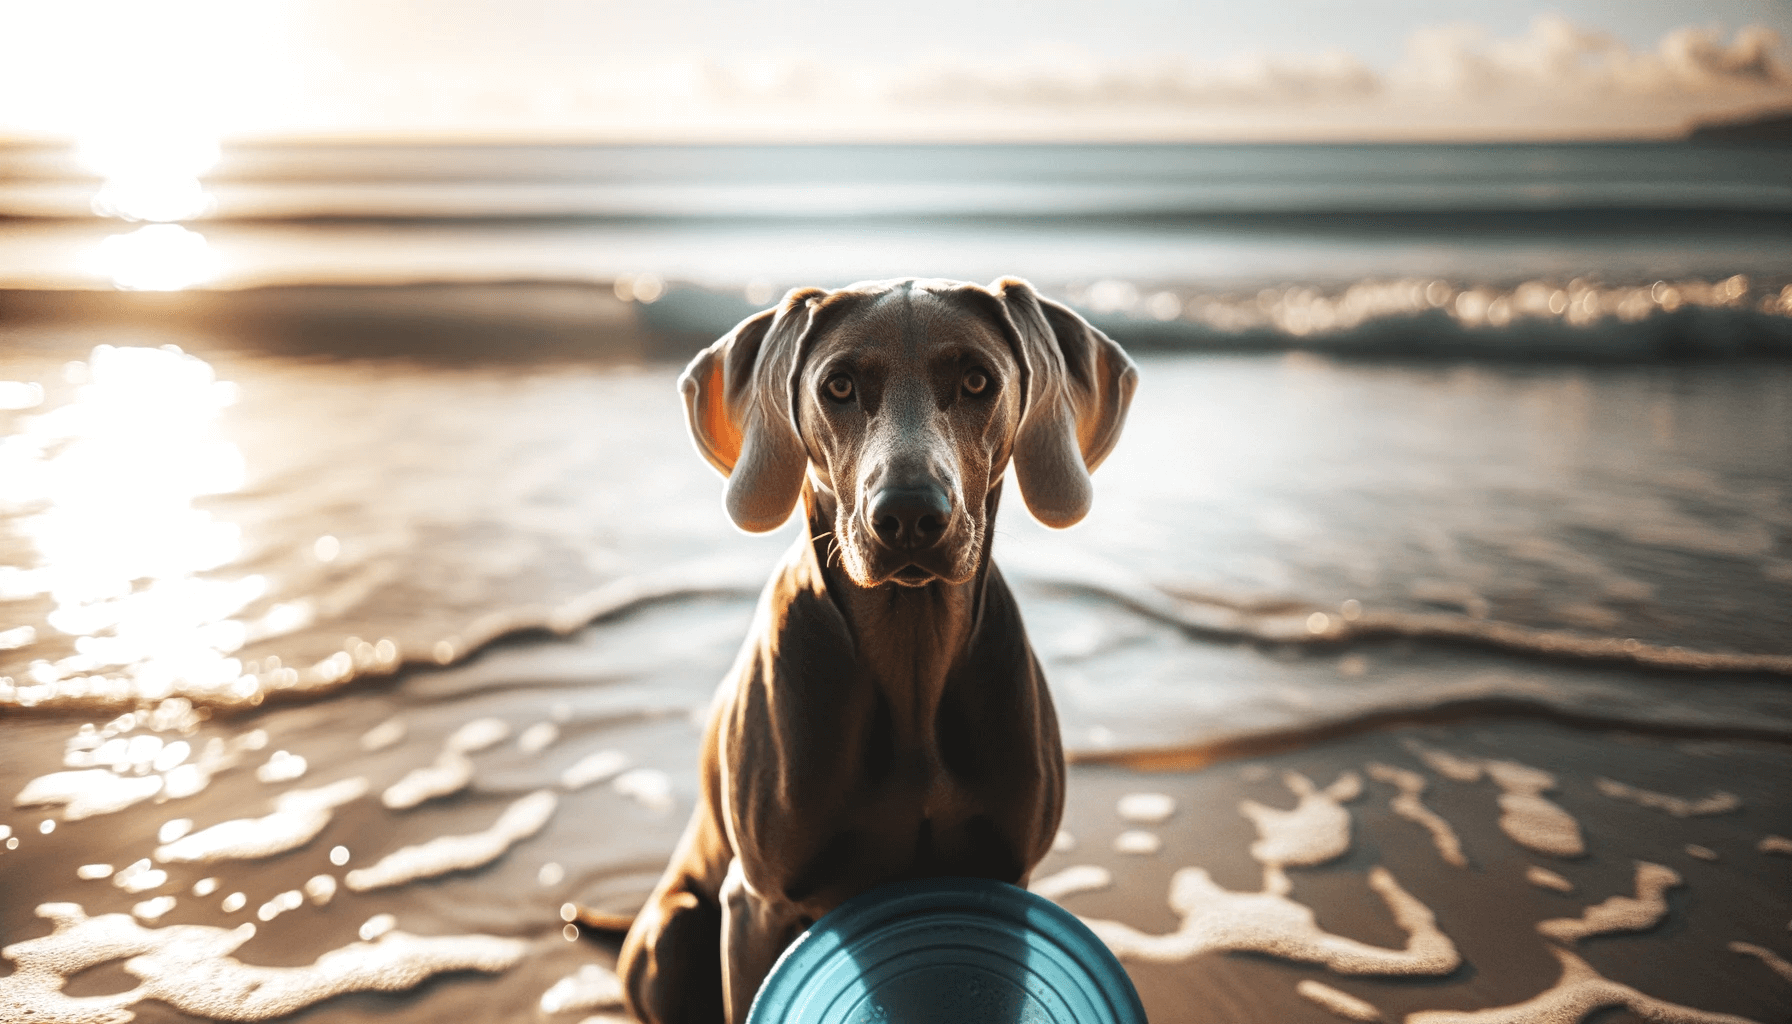 Weimaraner Lab mix dog sitting on a sunny beach, the ocean waves gently lapping at the shore in the background. The dog's coat is a glossy blend of colors, creating a stunning appearance.